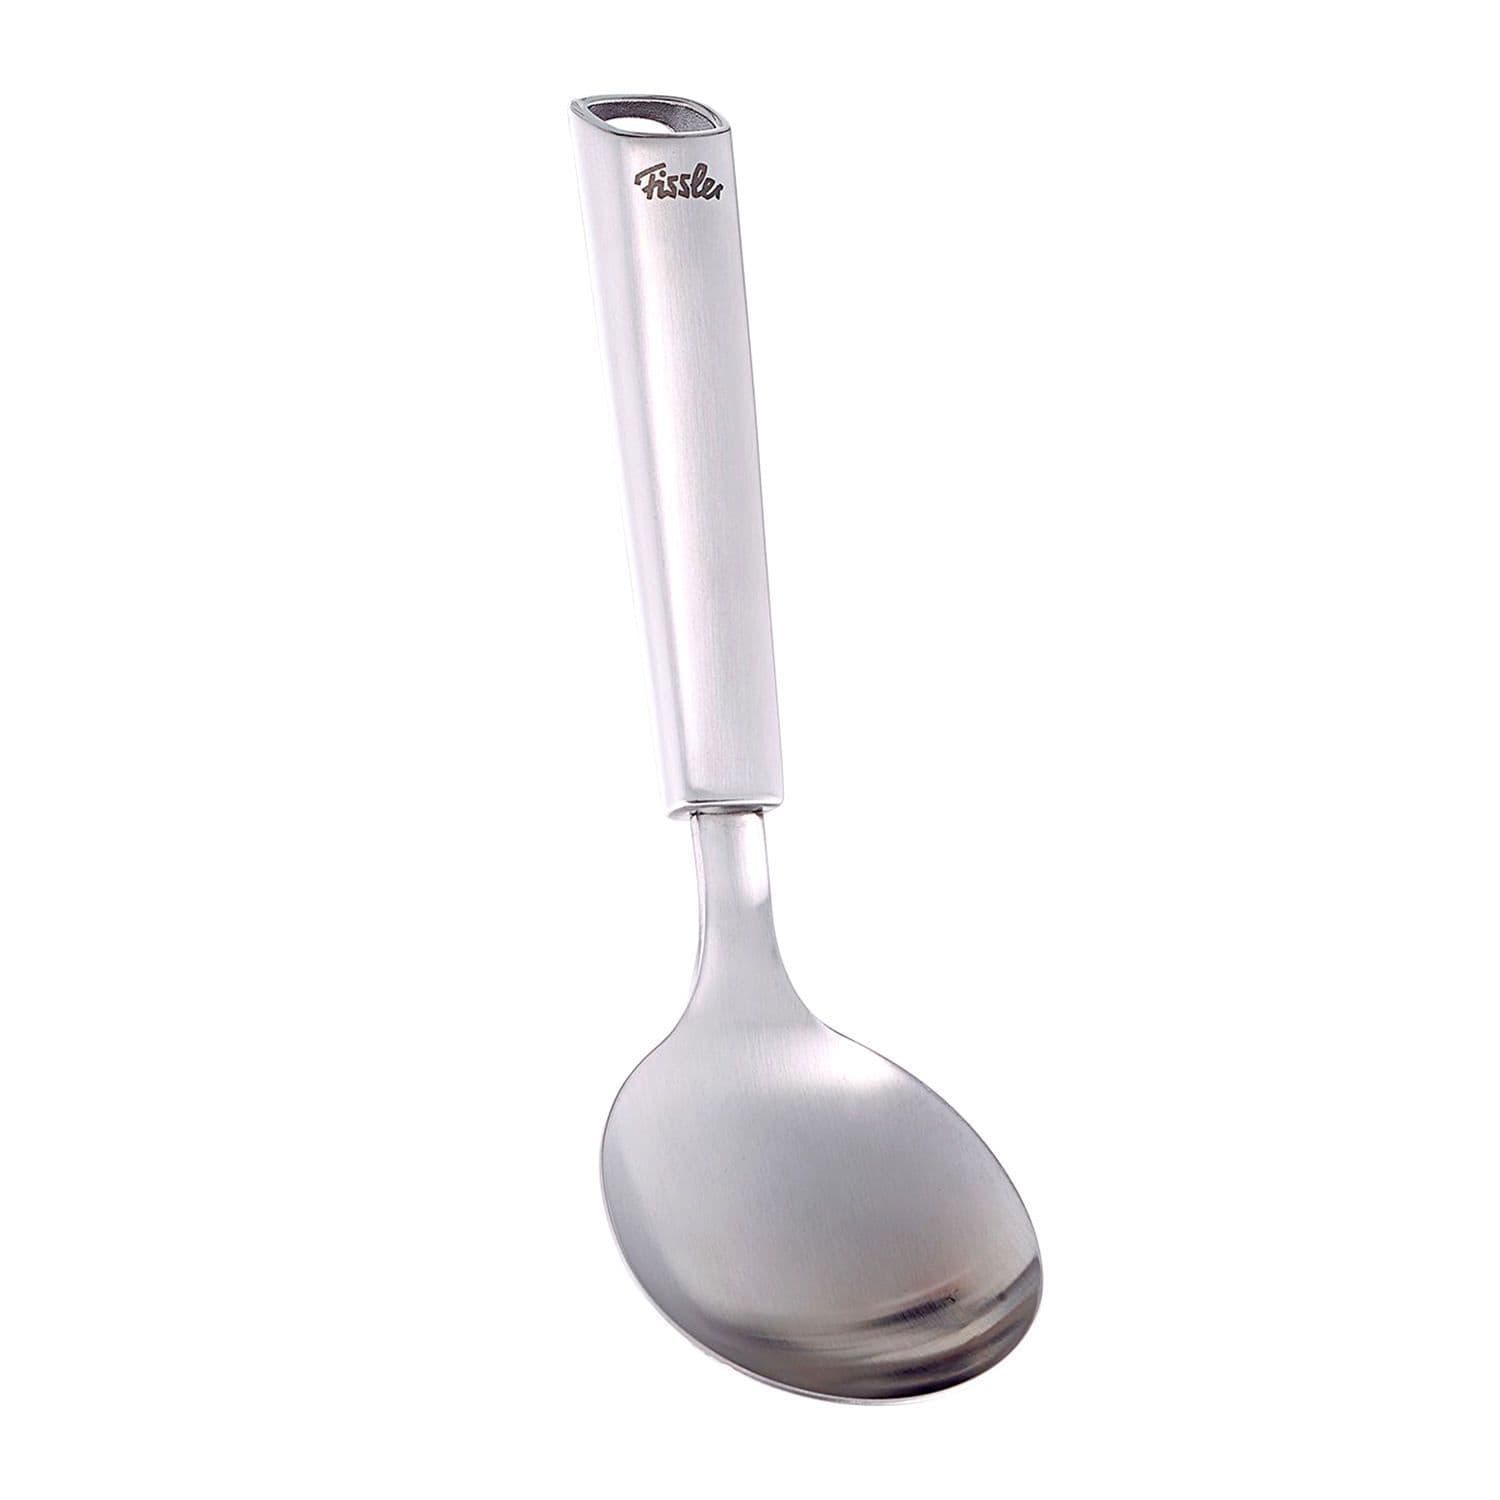 Fissler Rice Spoon - Silver - 089-008-00-003/0 - Jashanmal Home